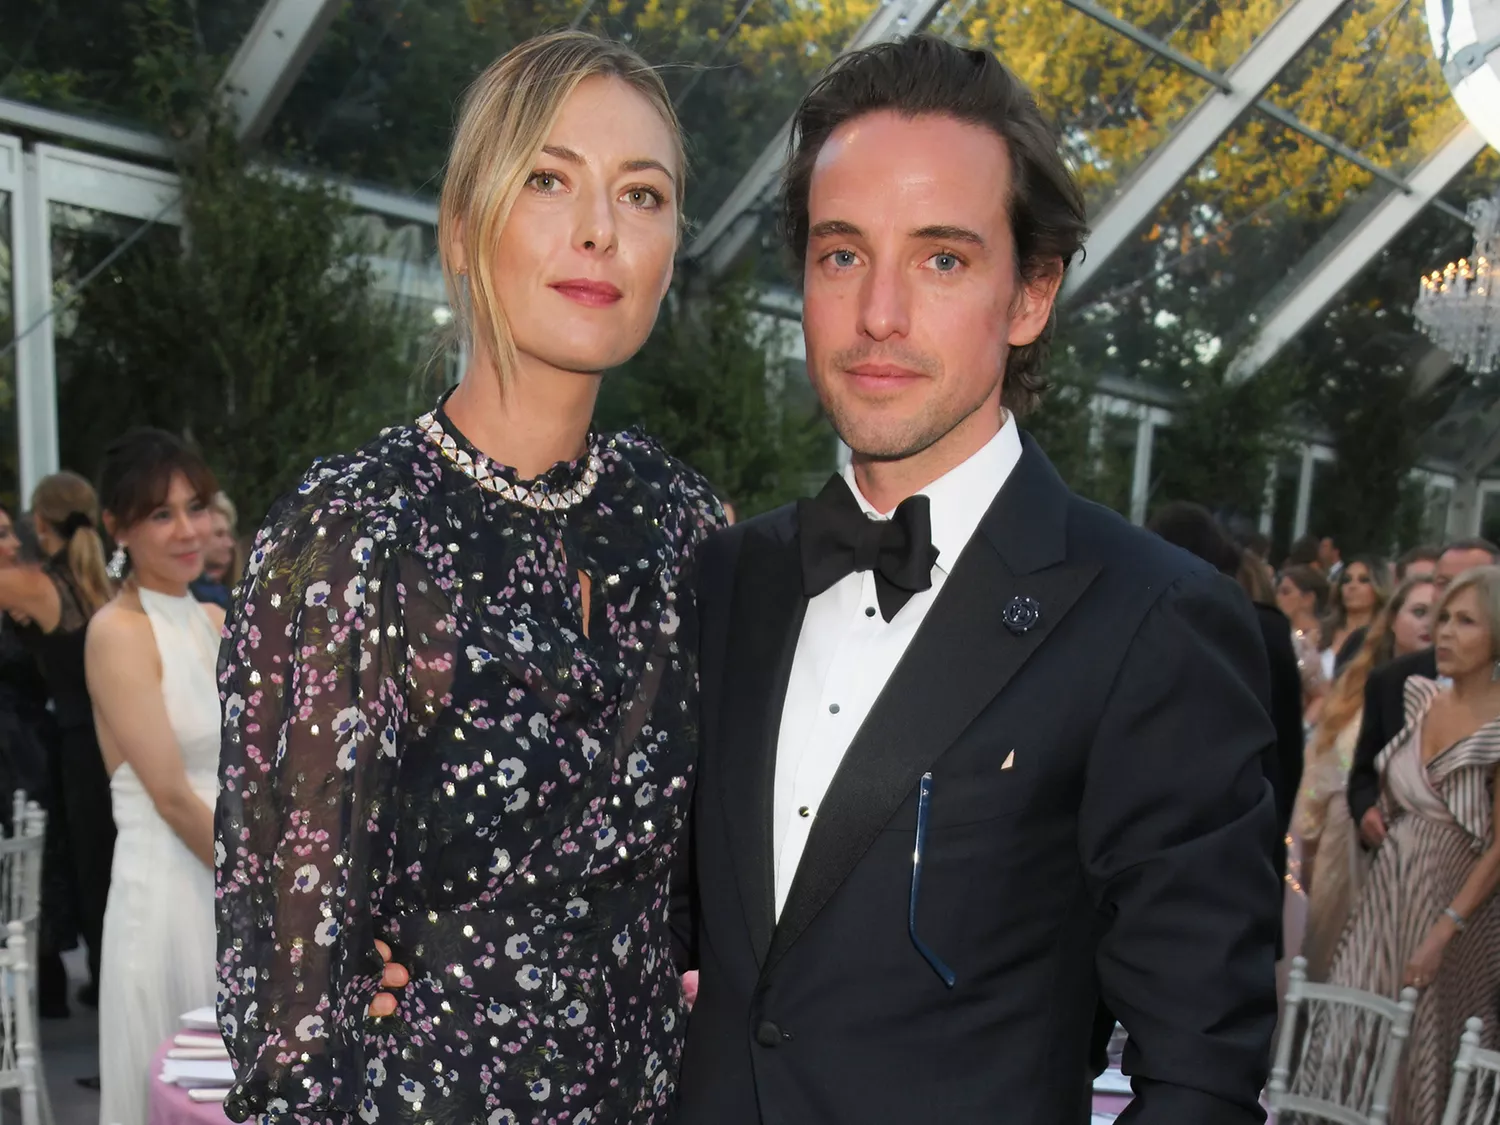 Maria Sharapova (L) and Alexander Gilkes attend the Argento Ball for the Elton John AIDS Foundation in 2018